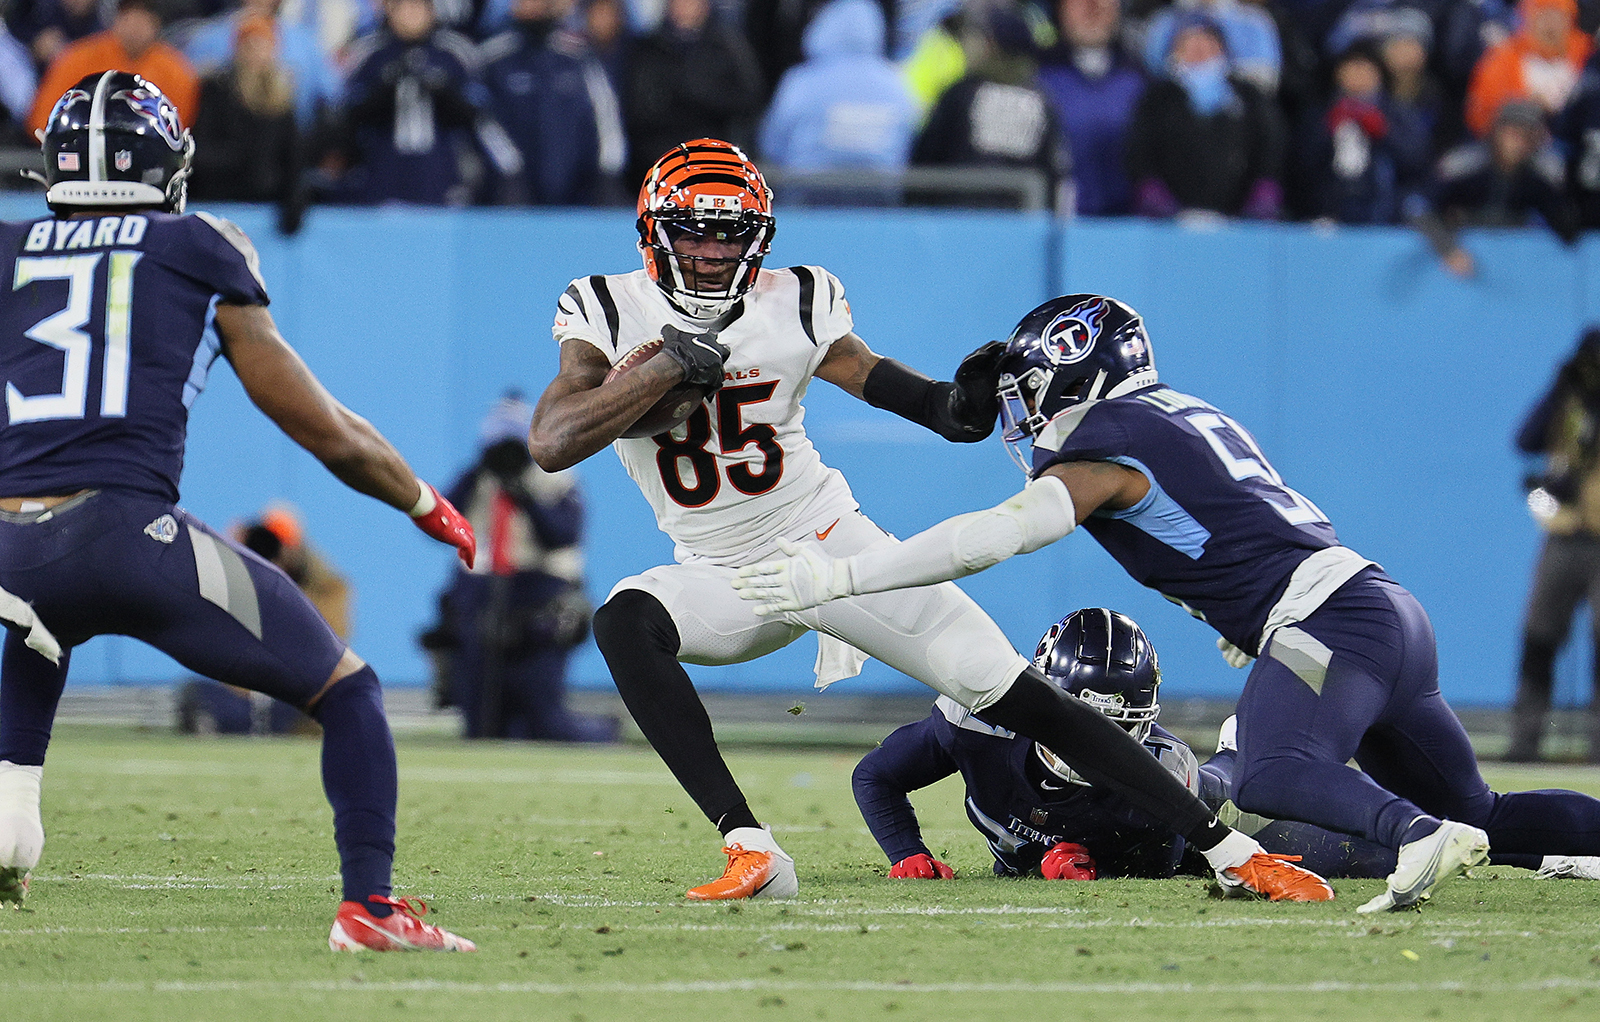 Tee Higgins # 85 of the Cincinnati Bengals against the Tennessee Titans during the AFC Divisional Playoff at Nissan Stadium on January 22, in Nashville, Tennessee. 